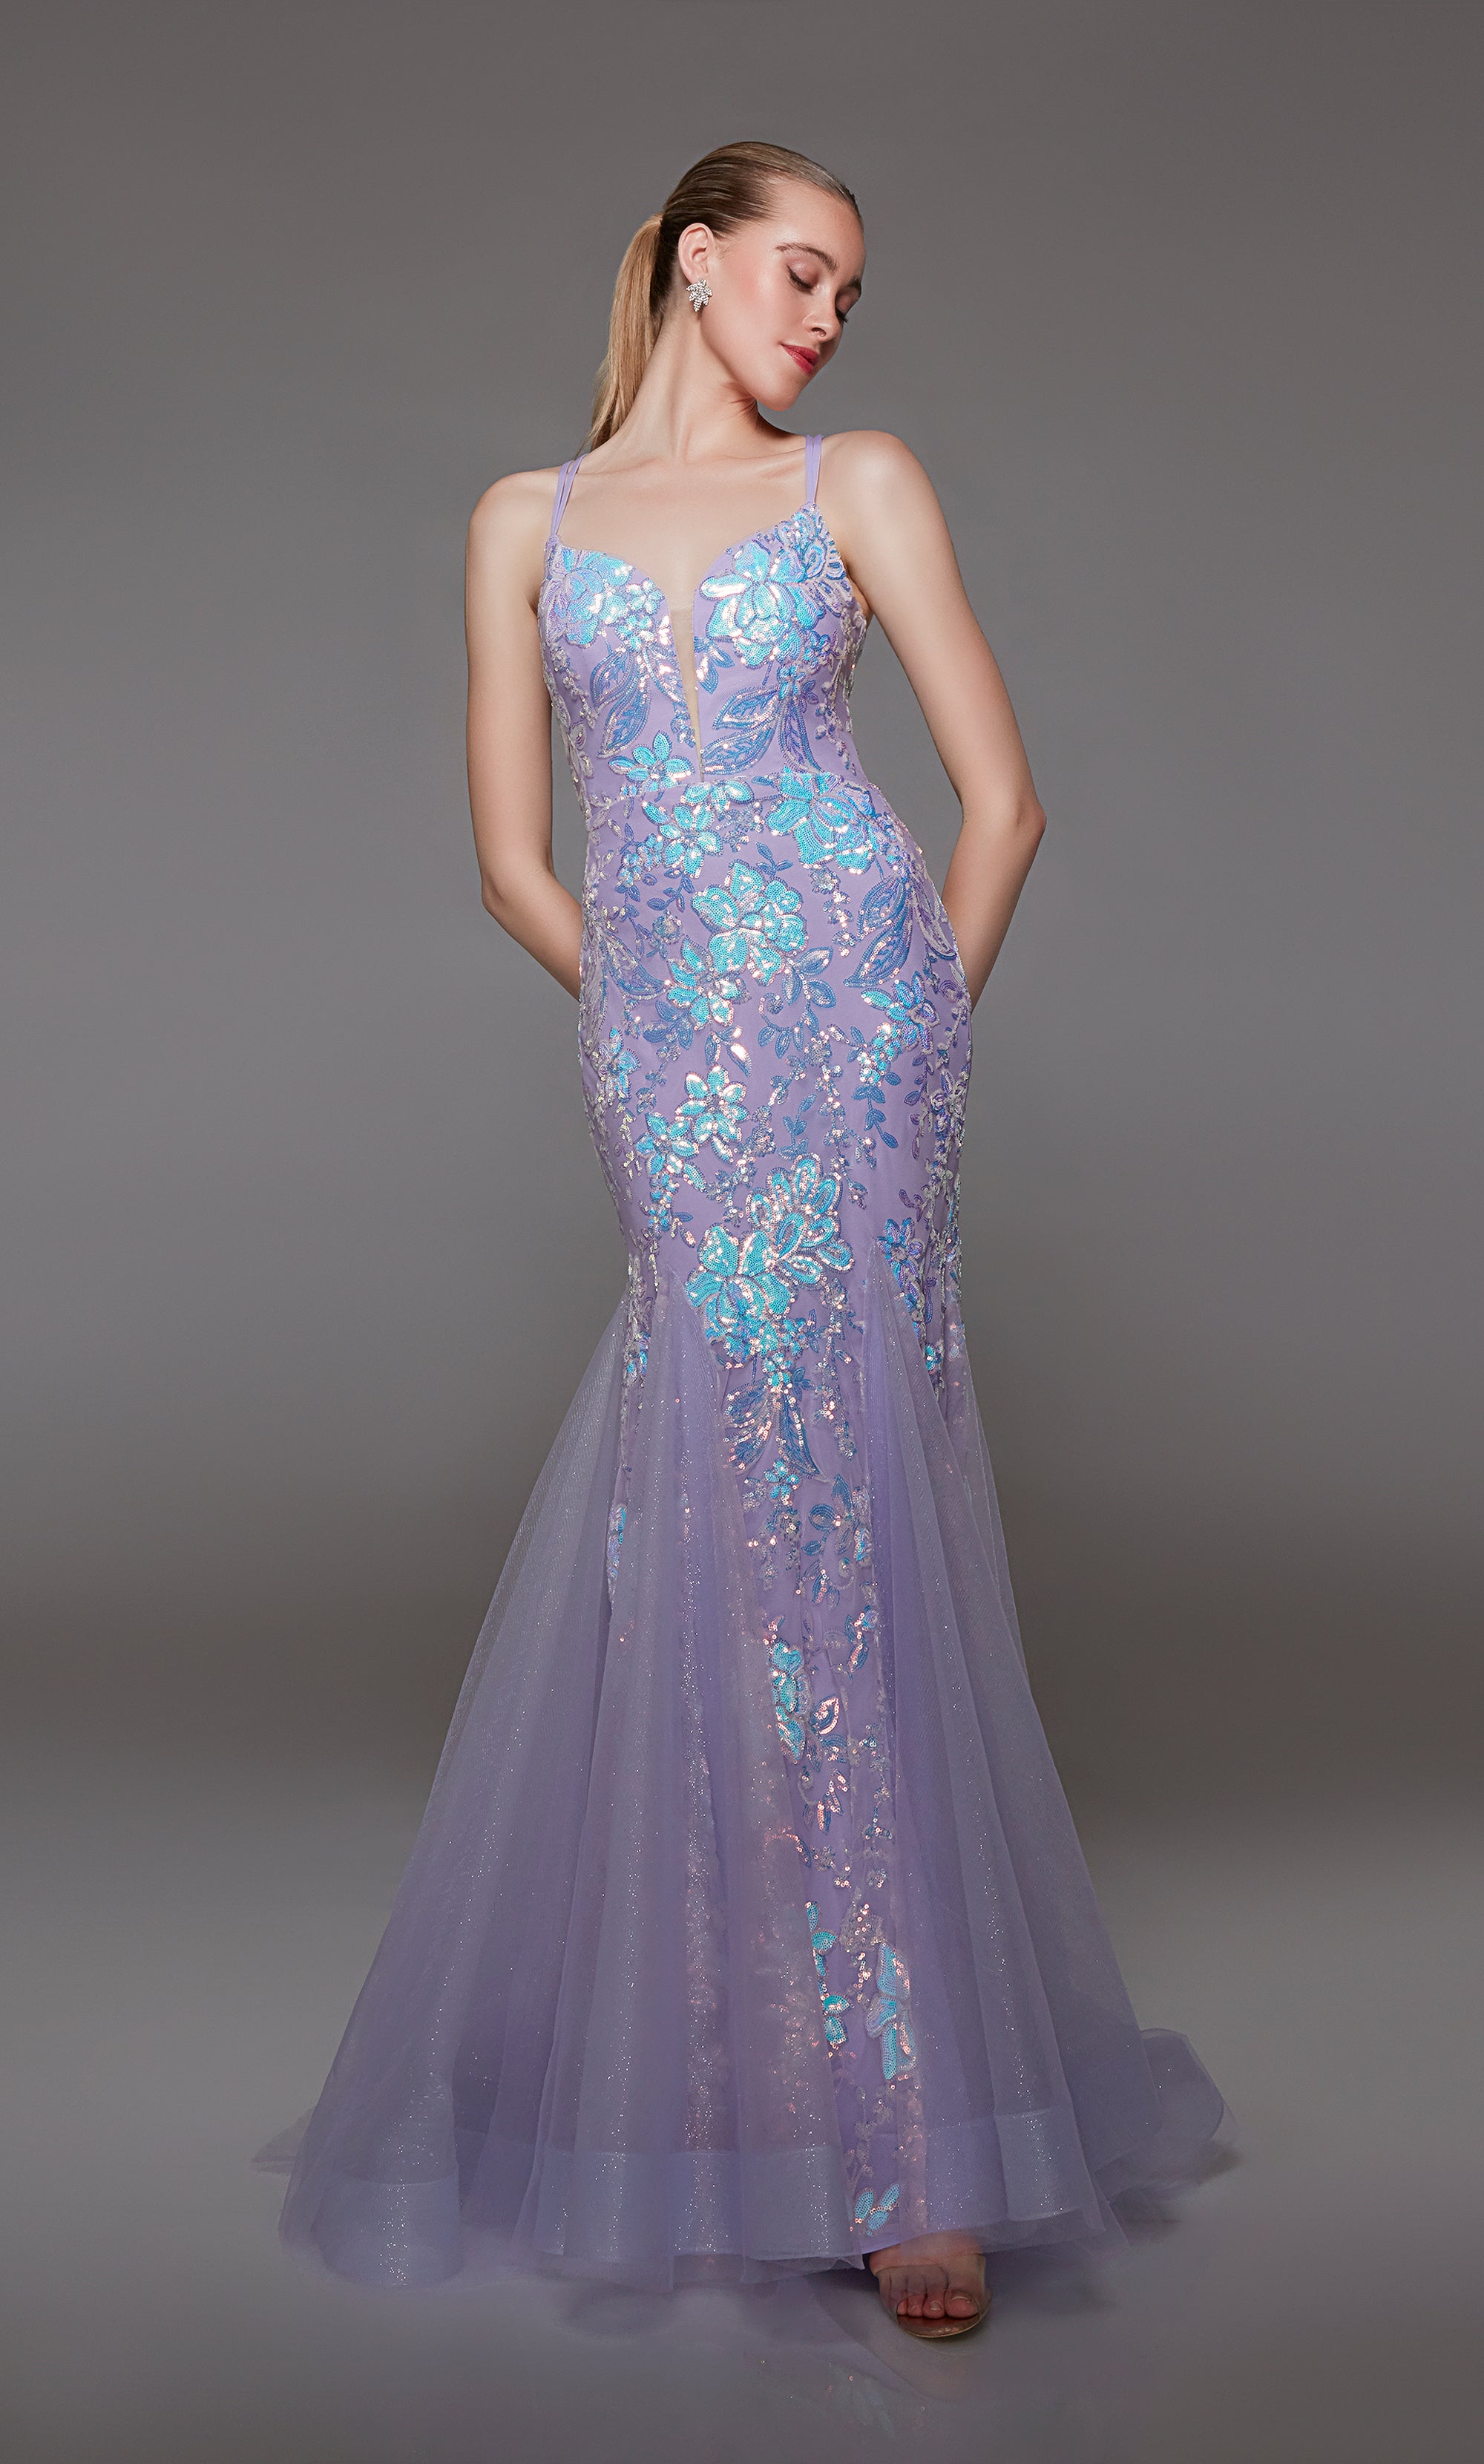 Lilac purple mermaid dress featuring an plunging neckline, iridescent sequin flowers, and an strappy open back for an chic and enchanting look.